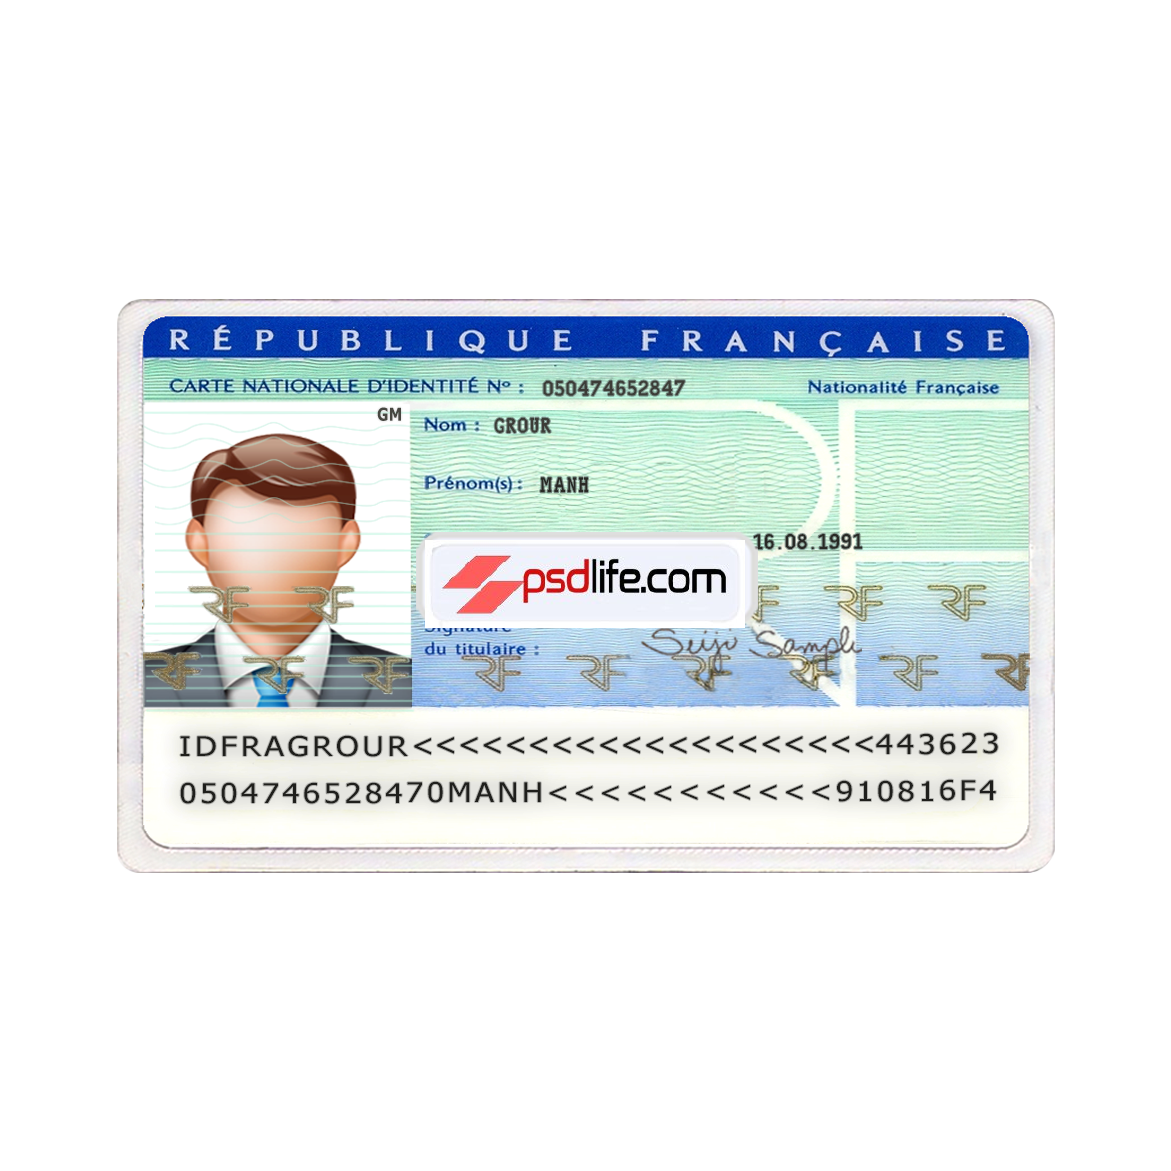 France id card template background and id card number | id card psd format download | id card template publisher | France carte d'identité faux modèle psd modifiable téléchargement gratuit